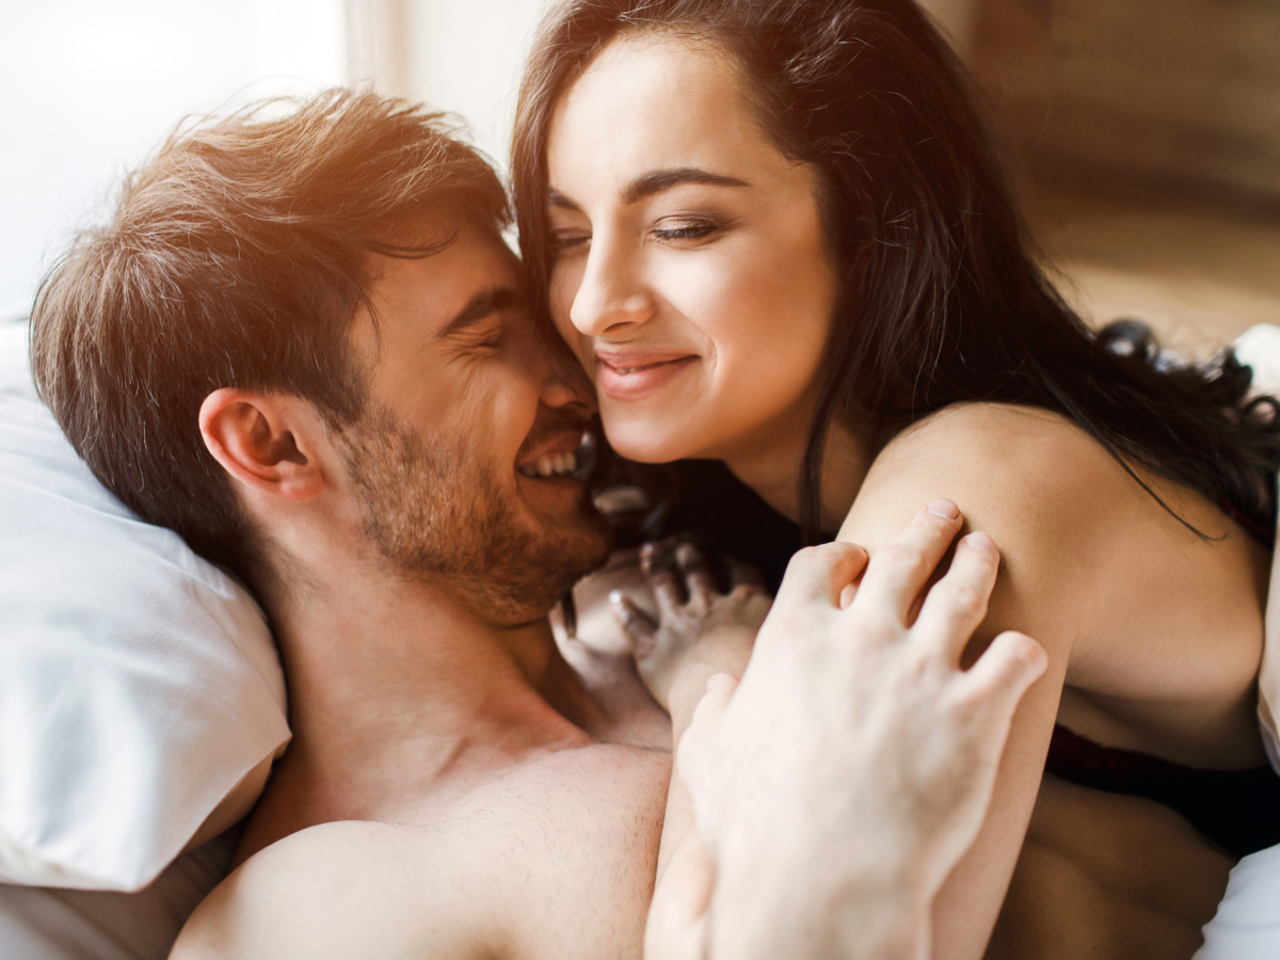 Study Couples have more sex when women initiate photo